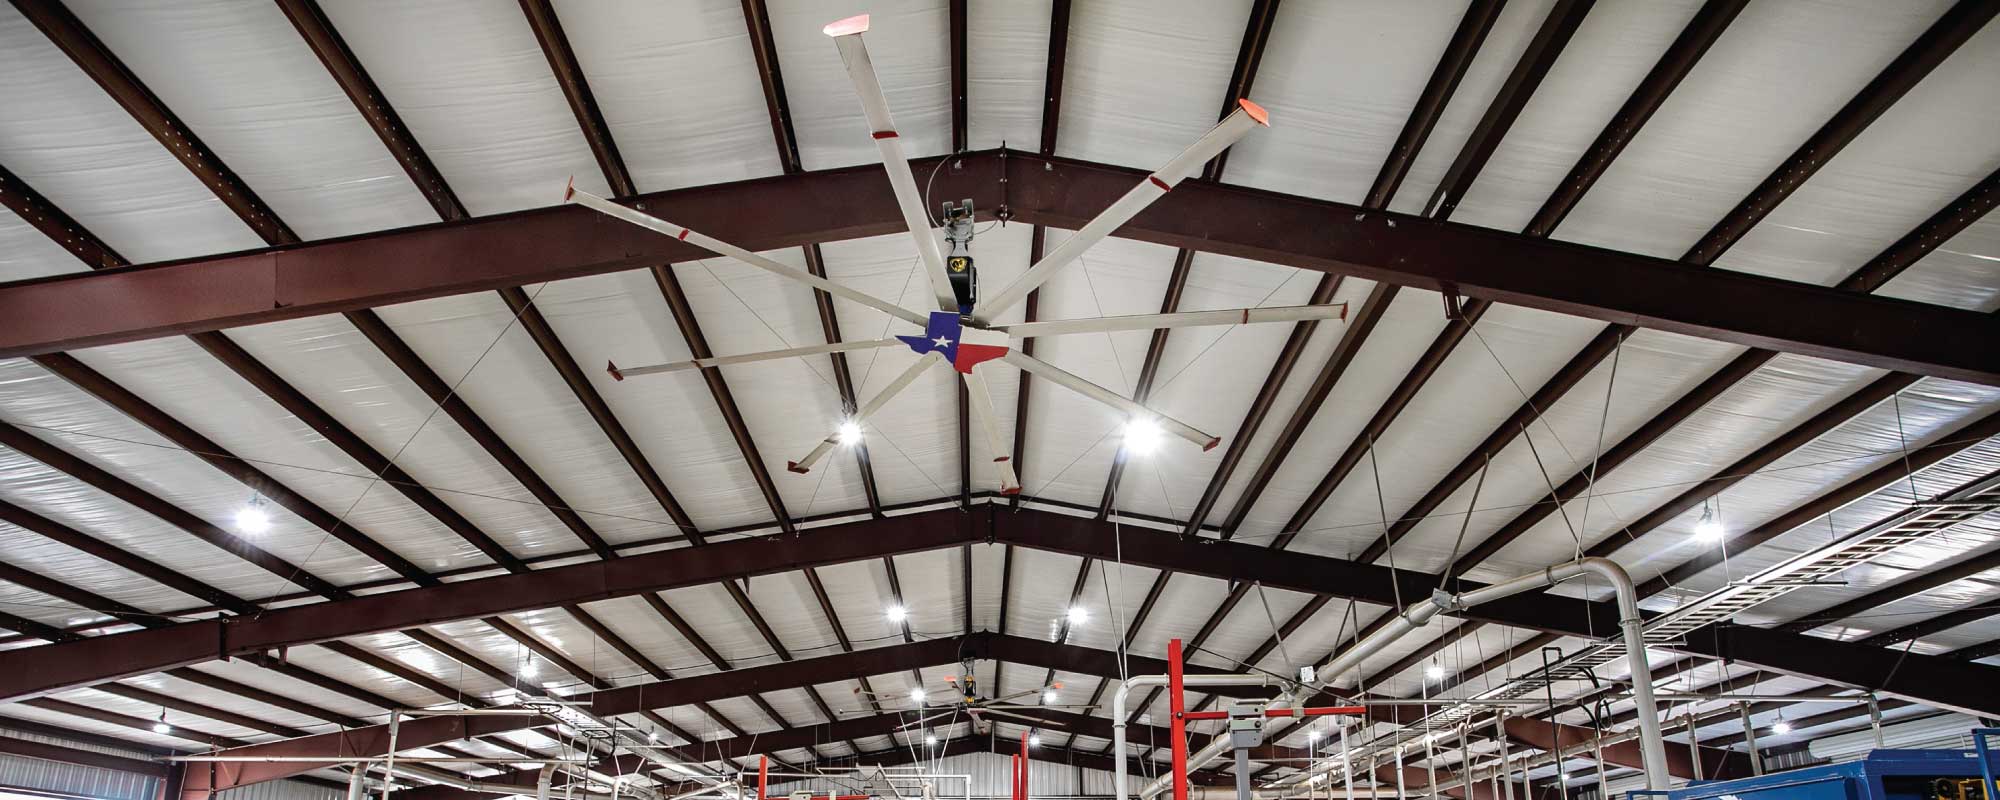 How to Cool Down a Warehouse in Texas